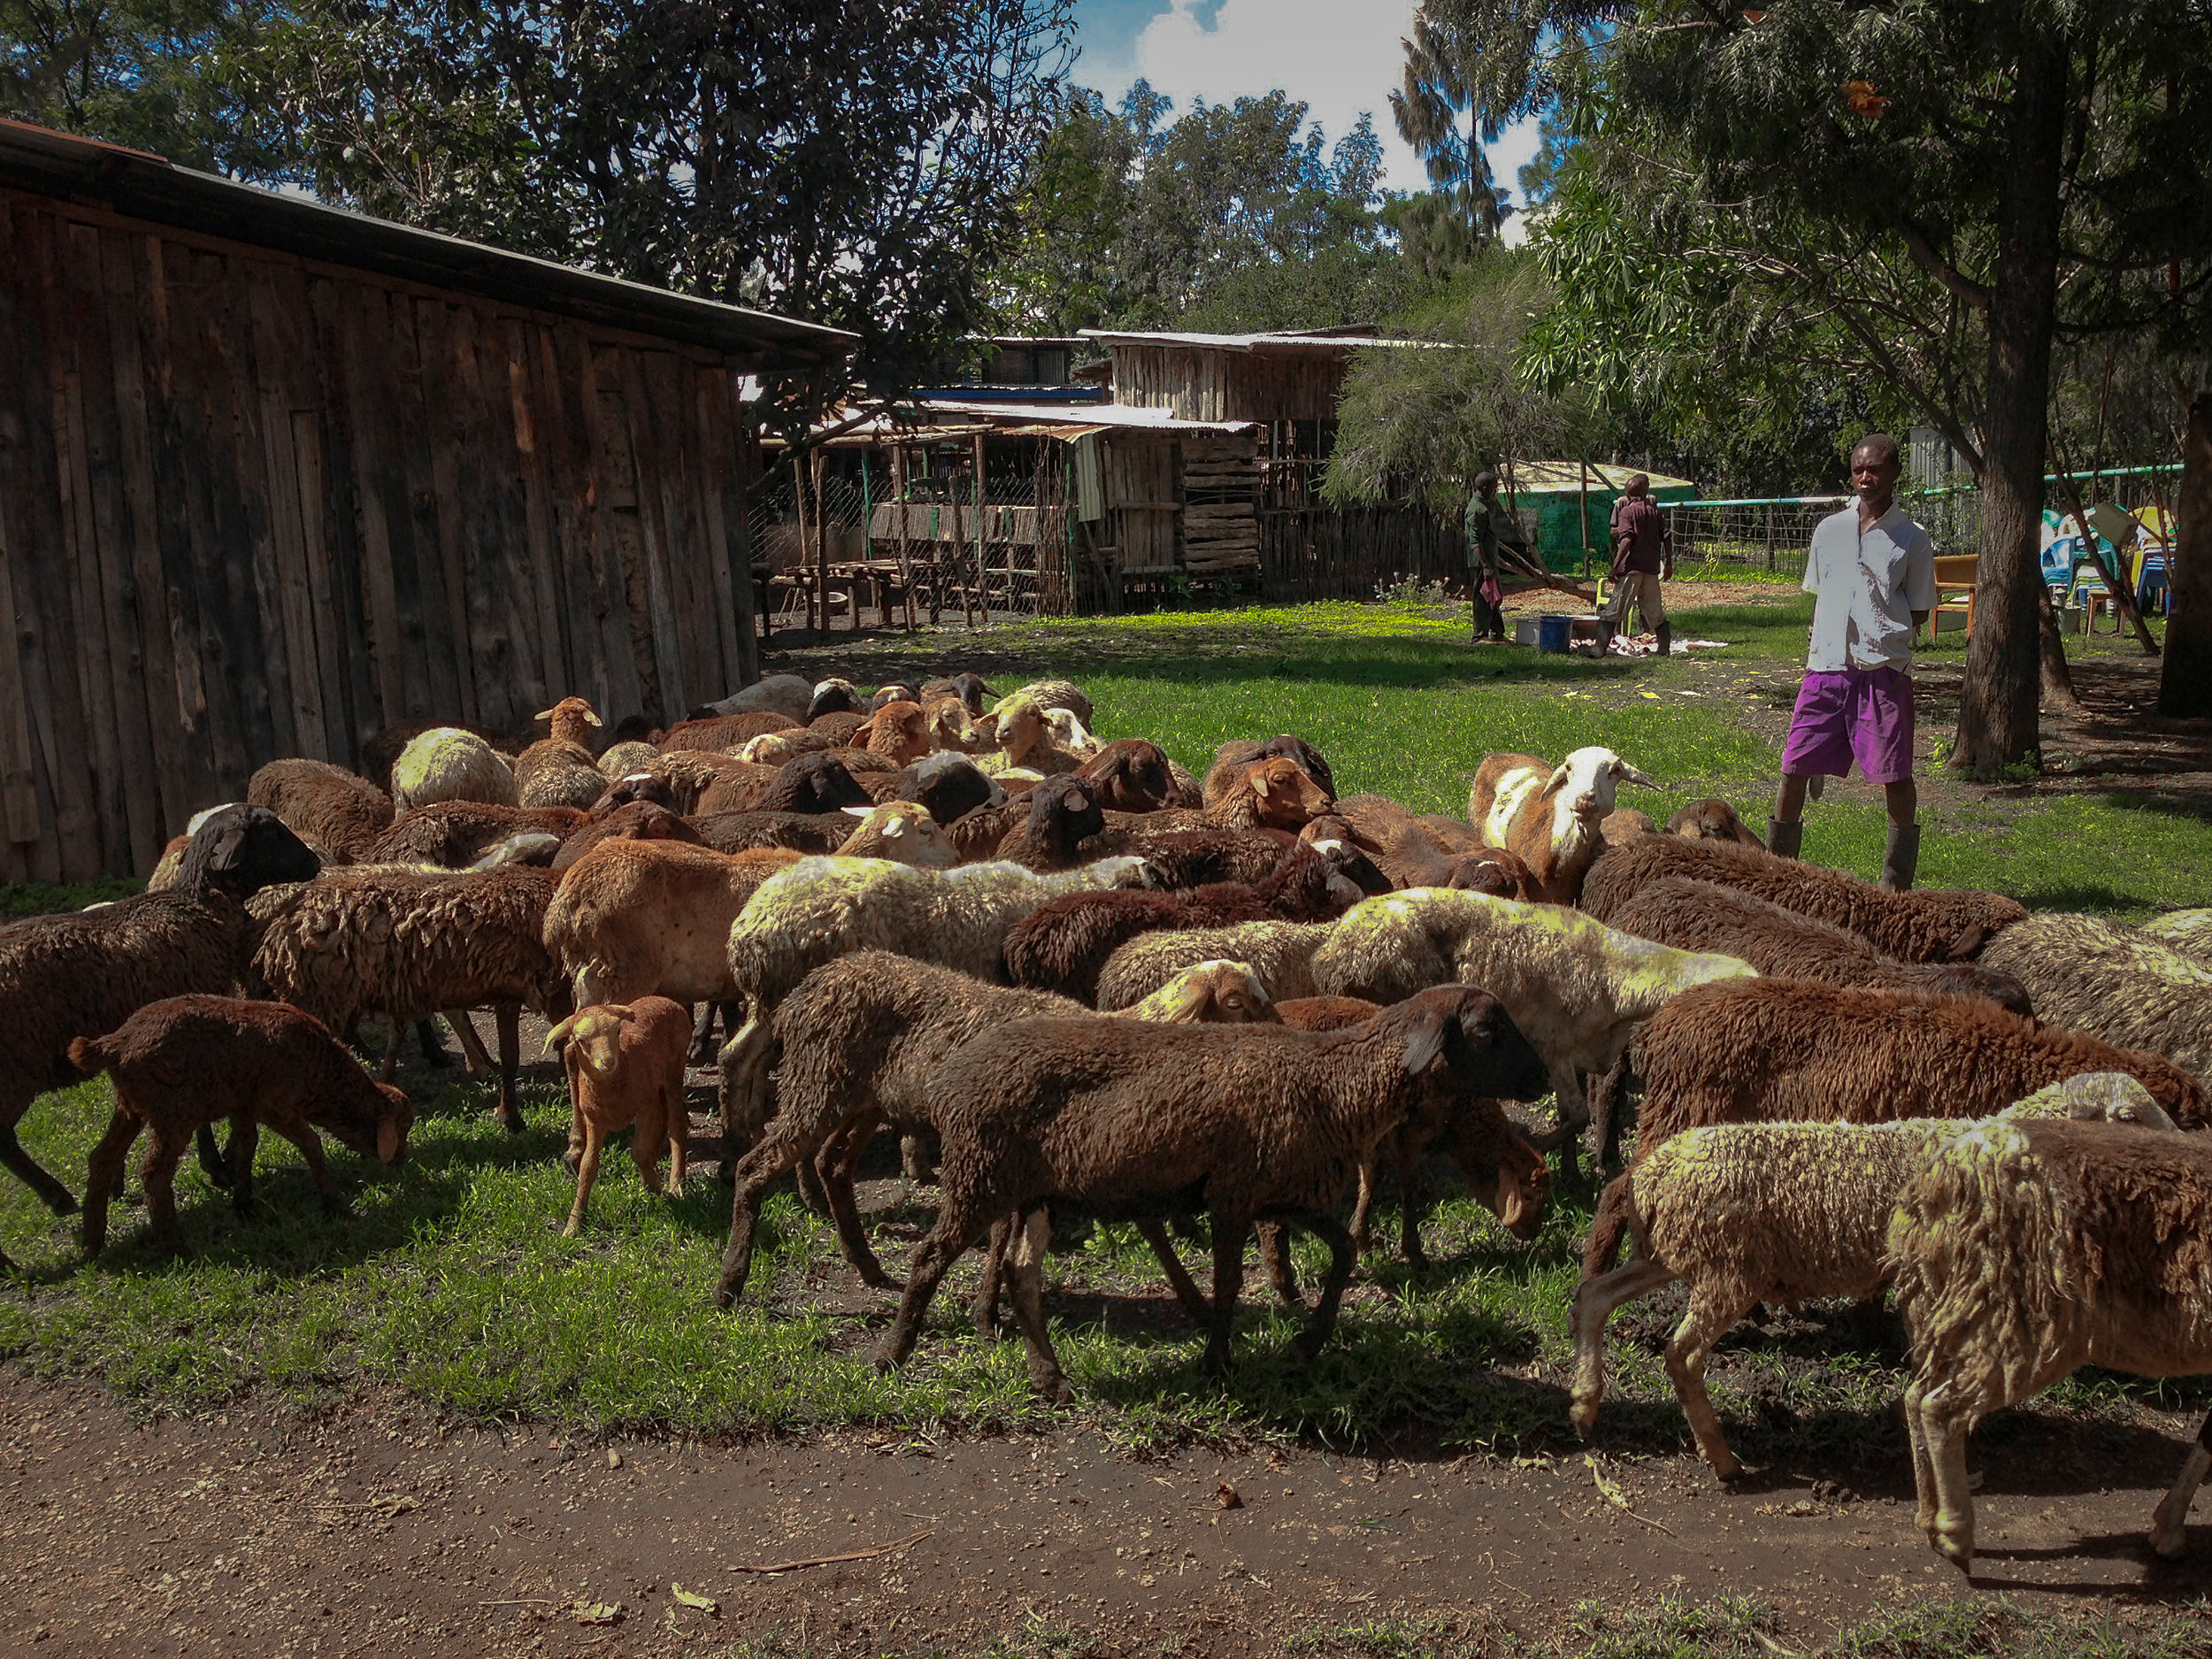 Sheep and goats graze in the compound